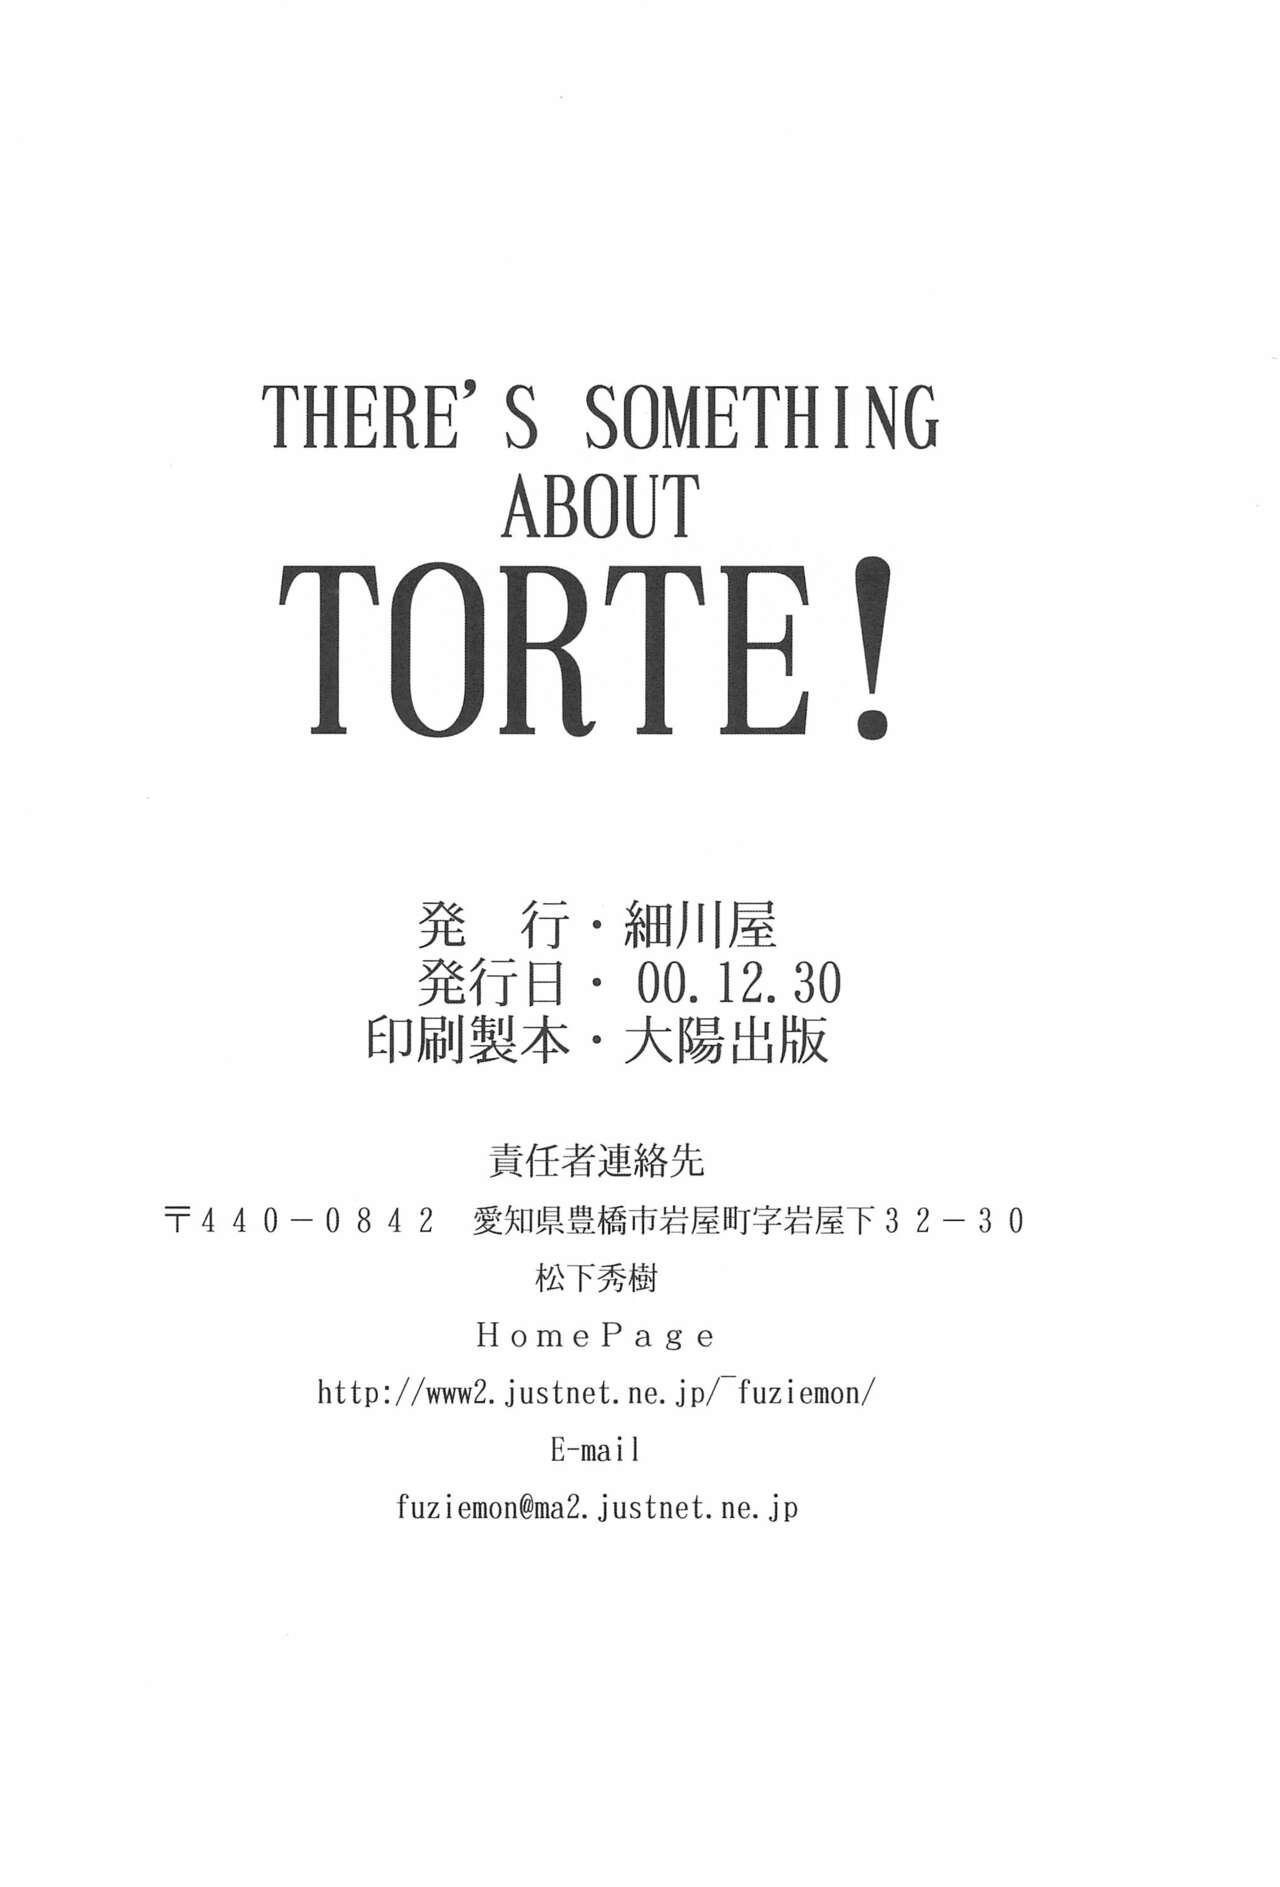 THERE’S SOMETHING ABOUT TORTE! 31